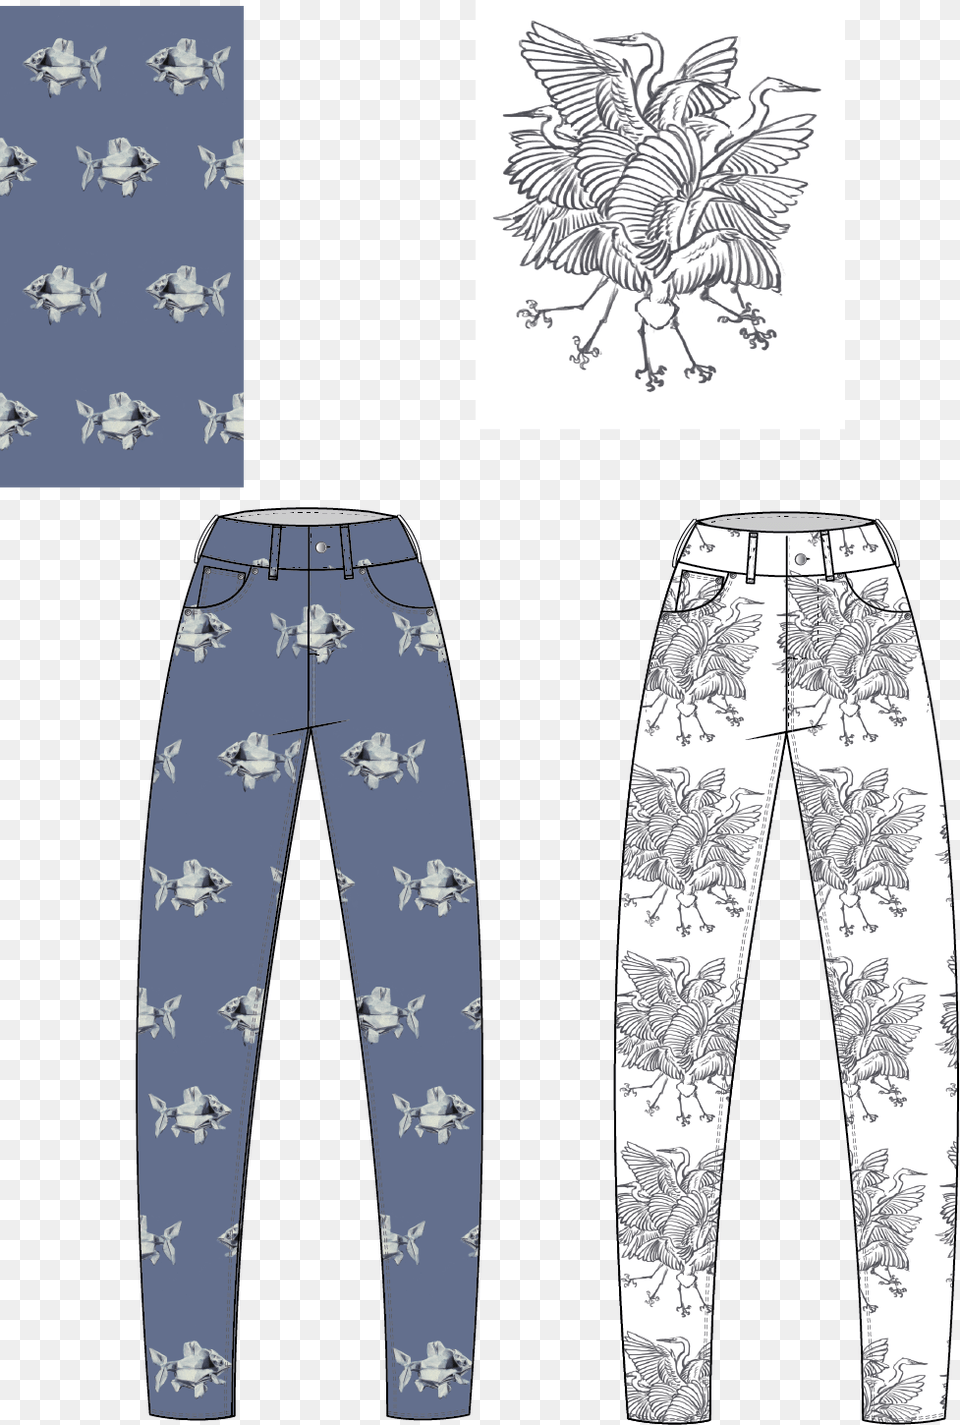 Drawn Jeans Cool Painted Pajamas, Clothing, Pants, Plant Png Image